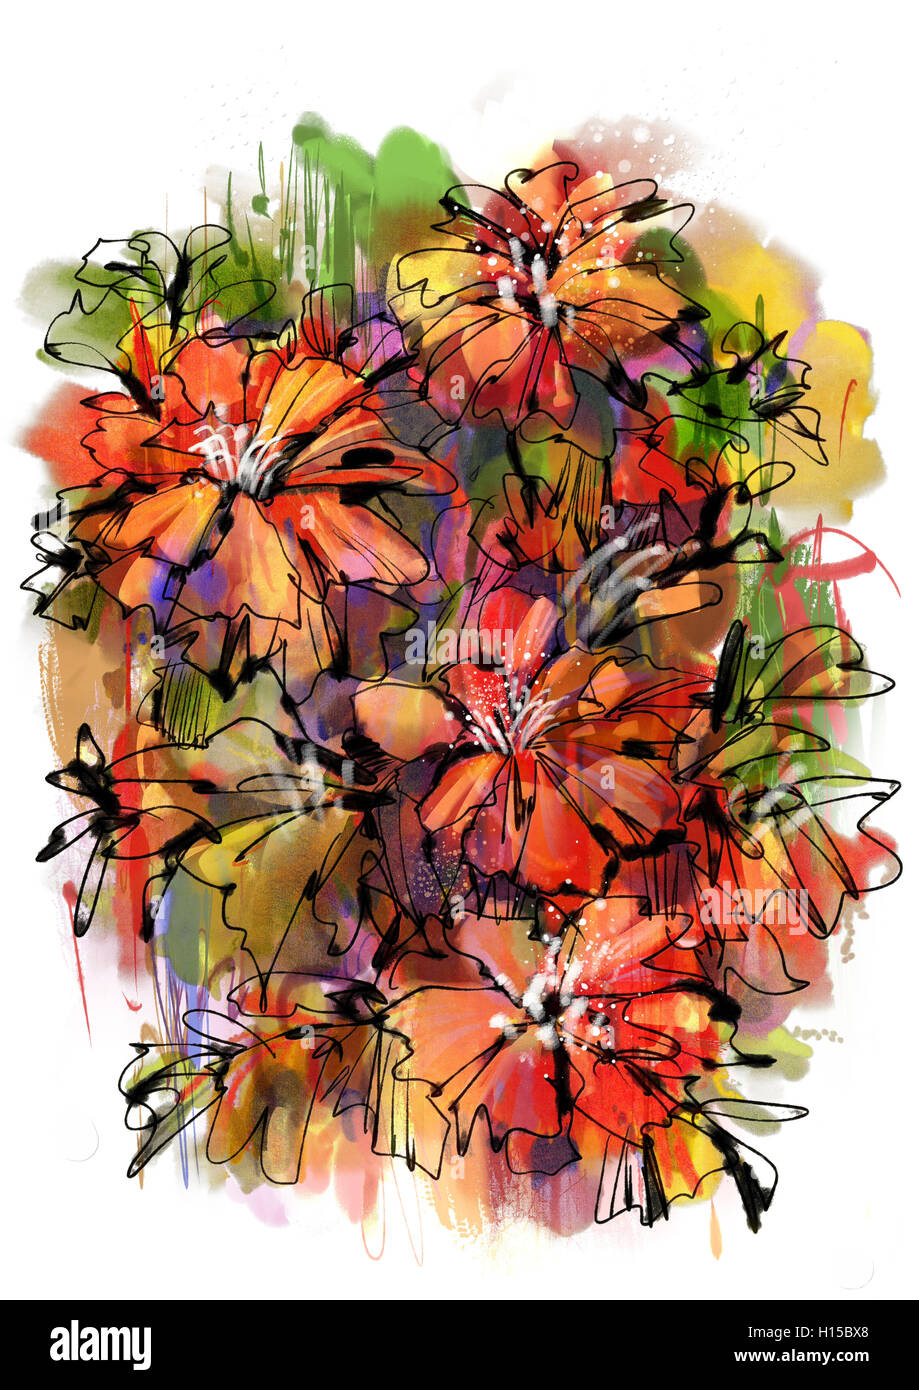 painting of colorful abstract flowers with watercolor style Stock Photo